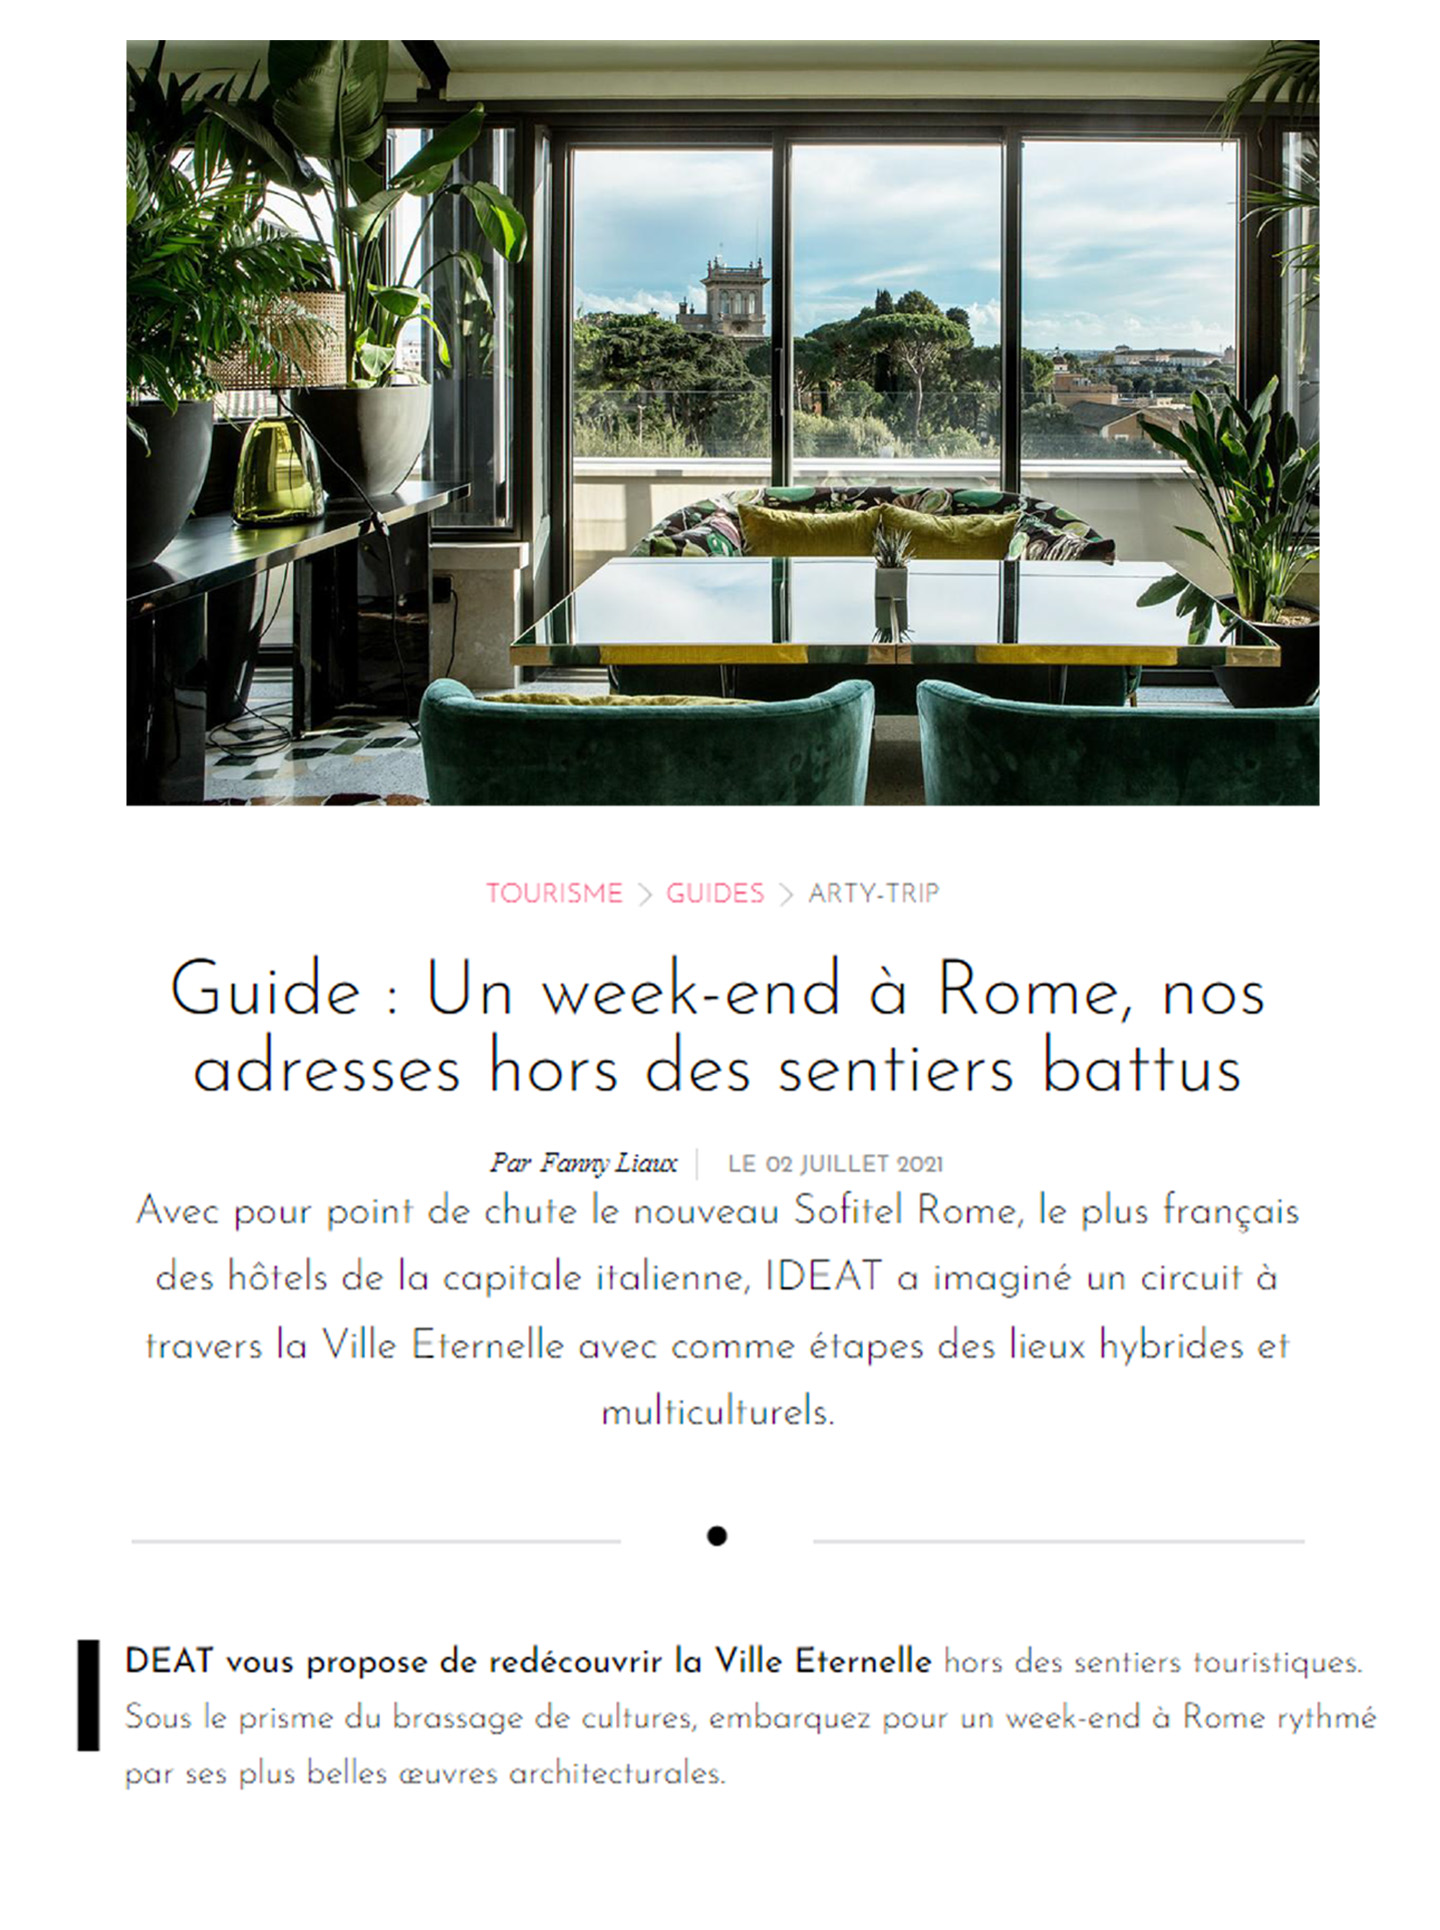 Article on the Sofitel Rome Villa Borghese realized by the studio jean-Philippe Nuel in the magazine Ideat, new lifestyle hotel, luxury interior design, Italy hotel, luxury hotel